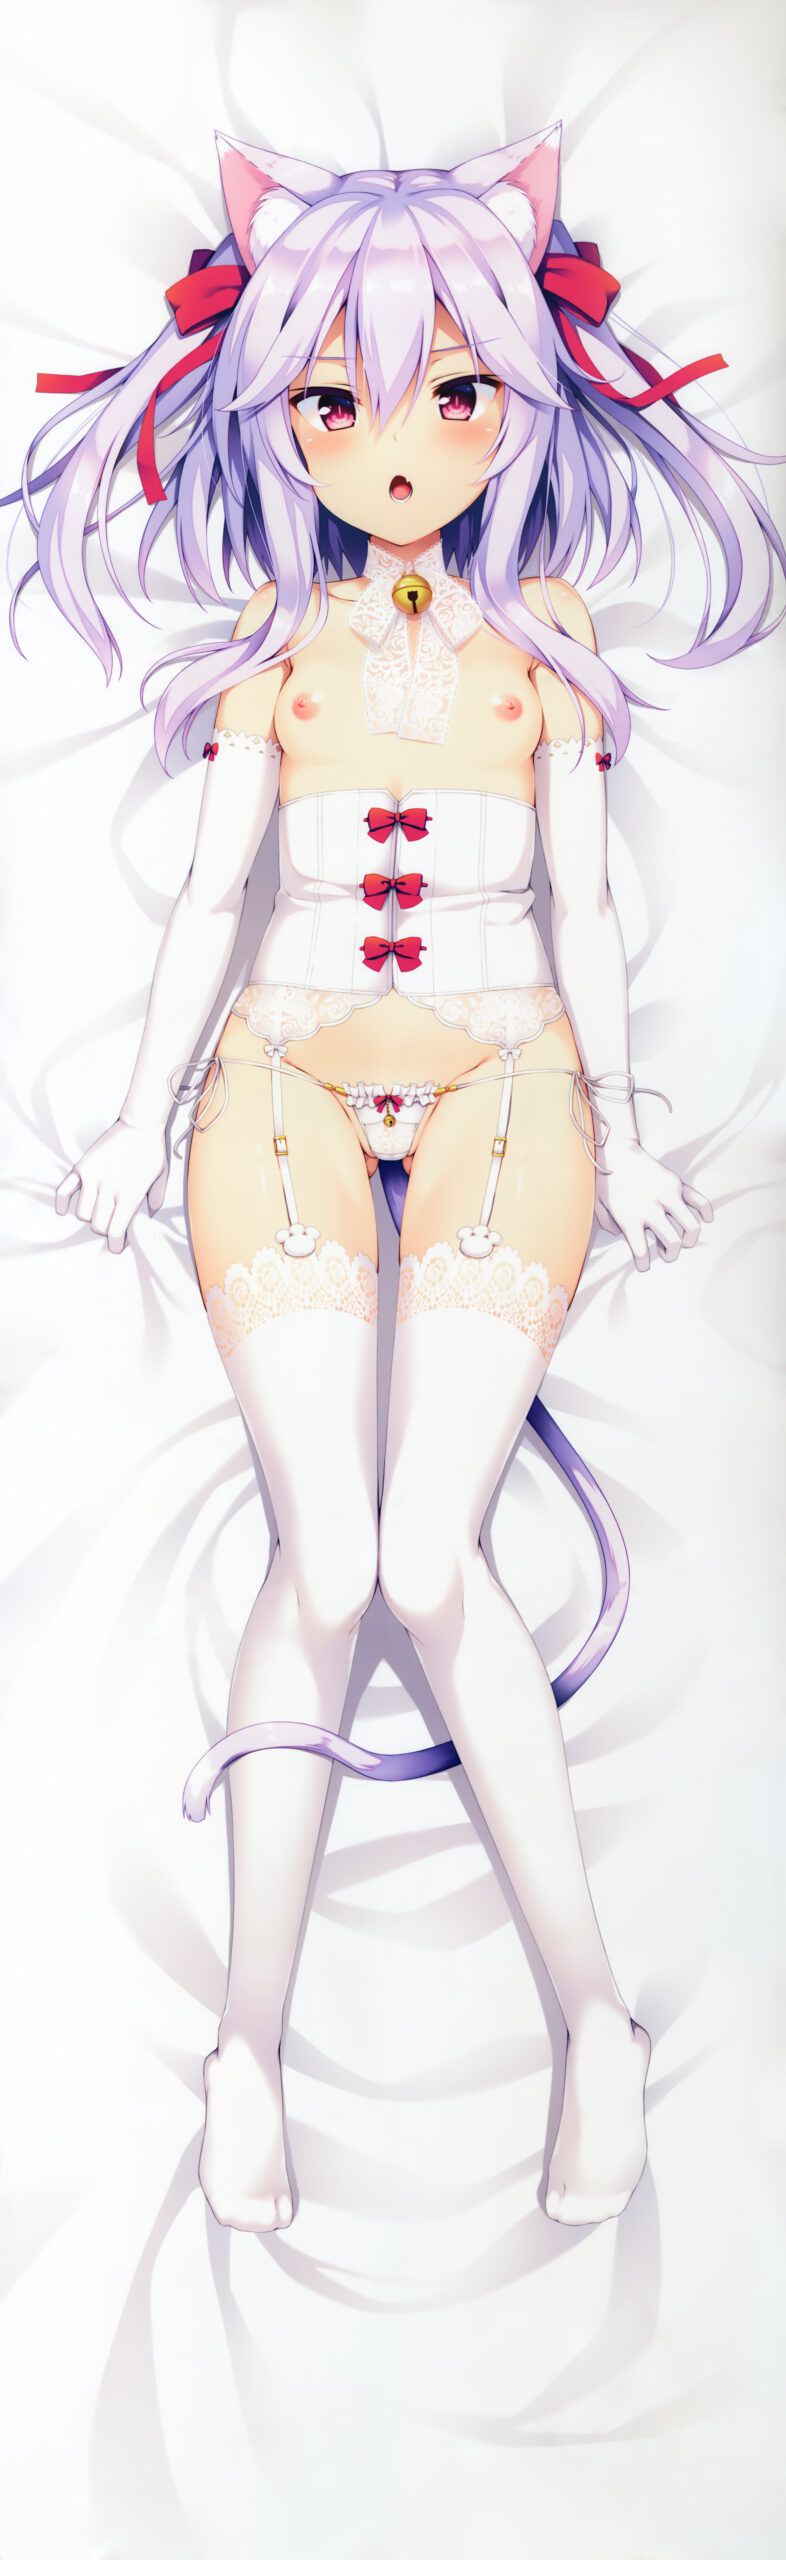 【Hugging Pillow】Images of erotic hugging pillowcases from anime and video games Part 144 48